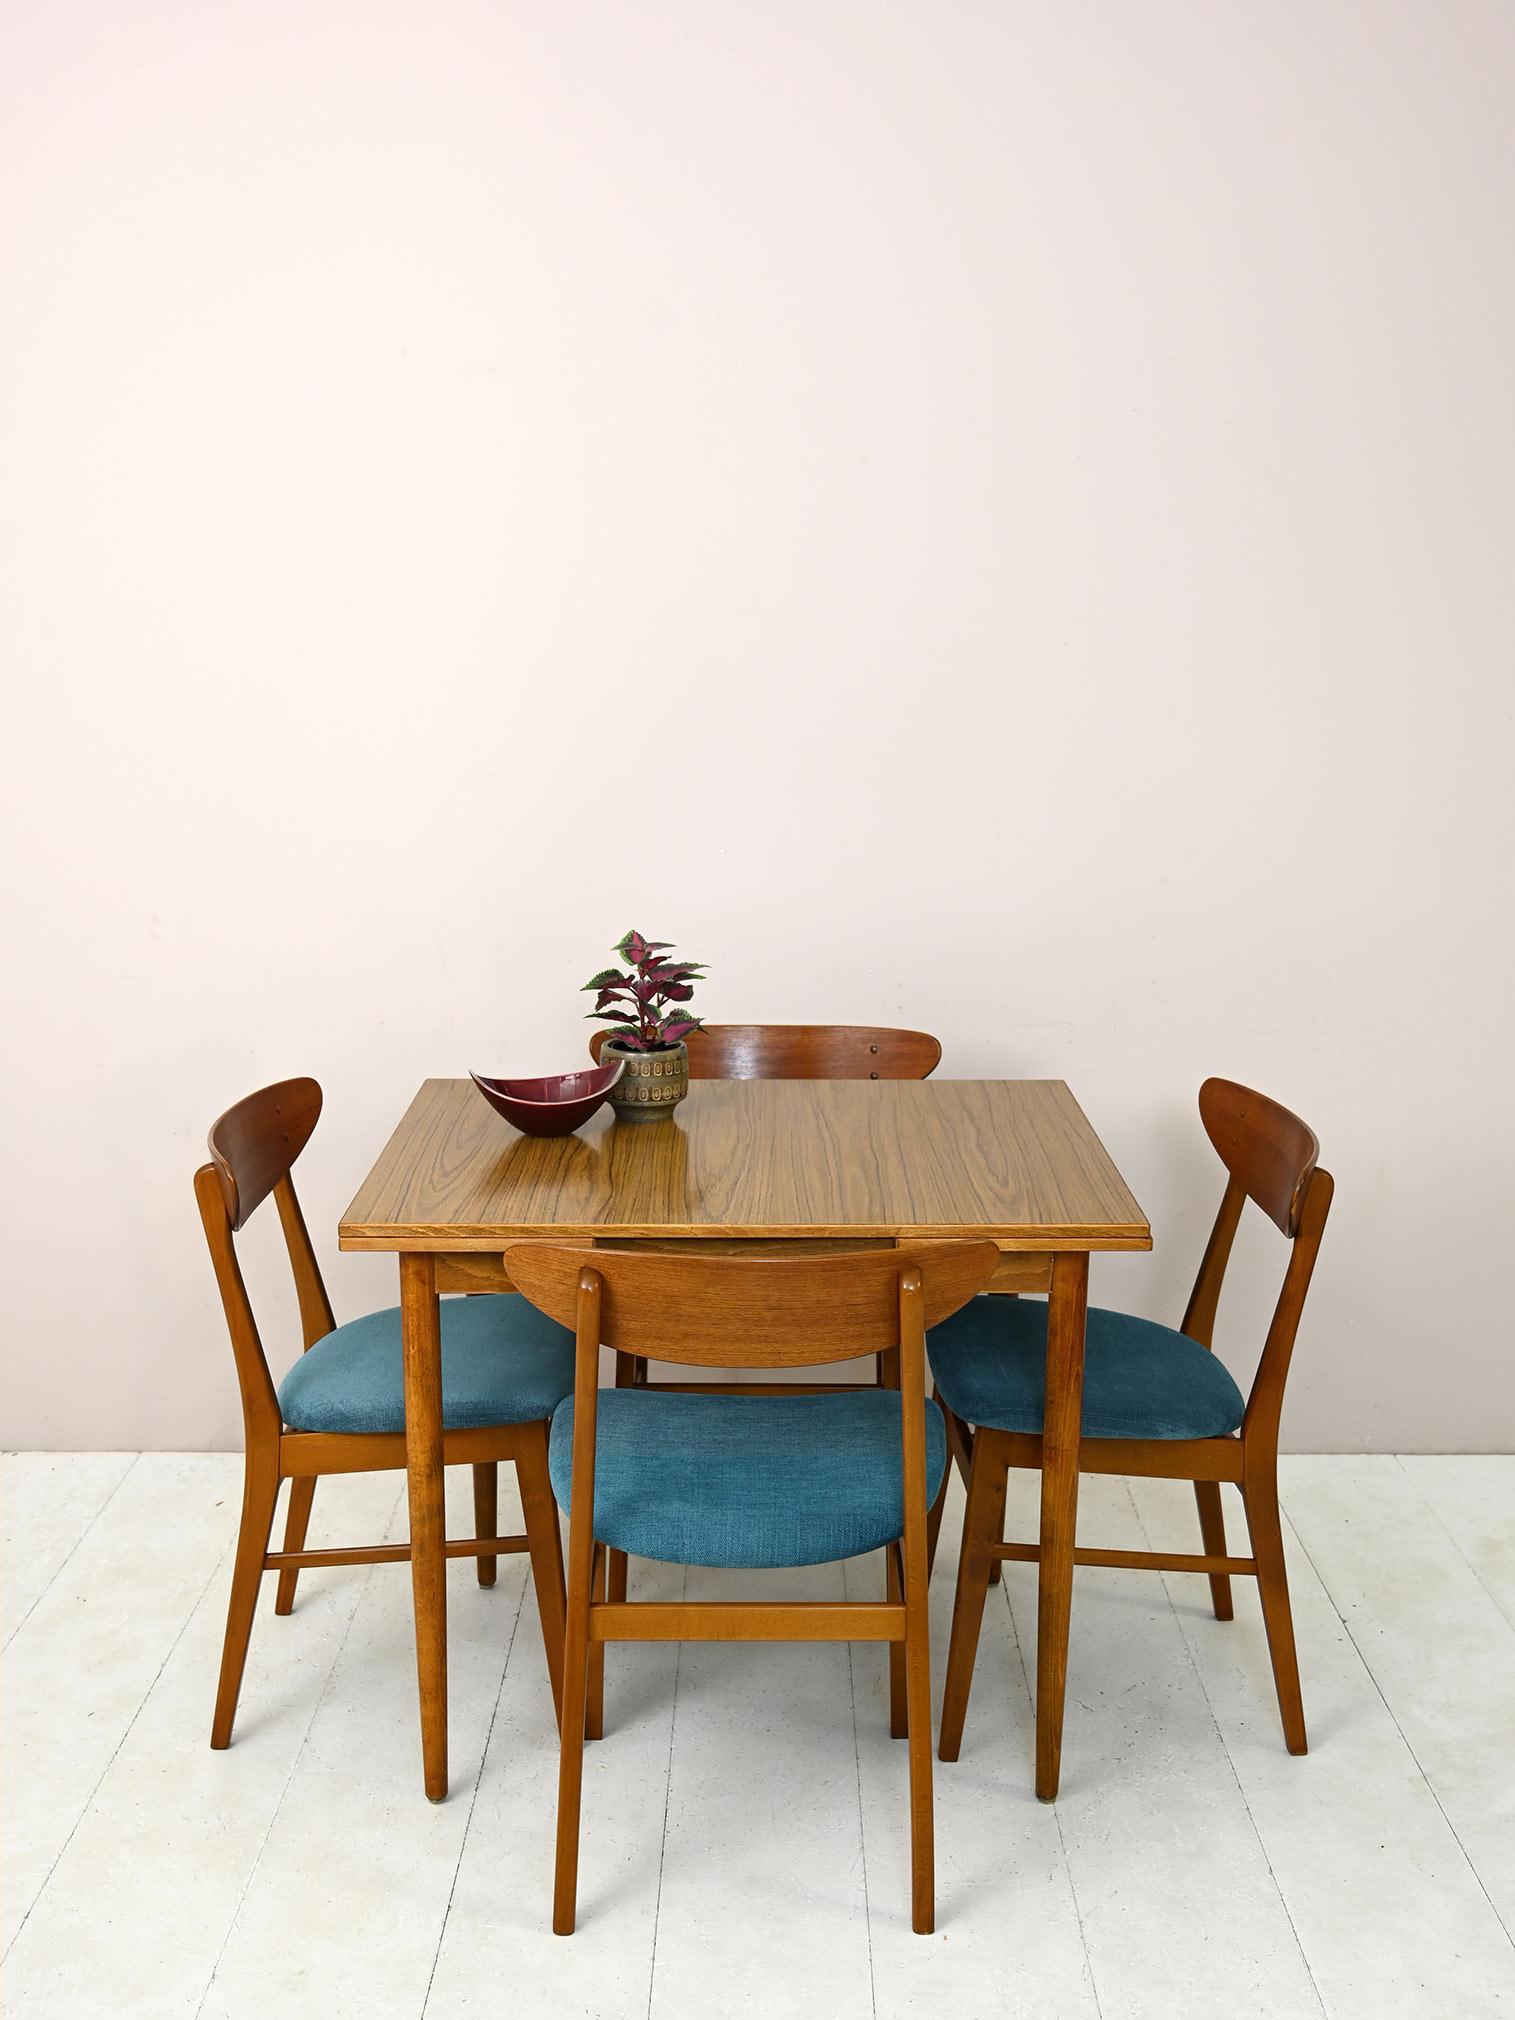 Scandinavian vintage extendable table.

This dining table is characterized by the presence of the wood-effect formica top, which makes it aesthetically pleasing but above all very durable. It can also be extended thanks to the presence of the two